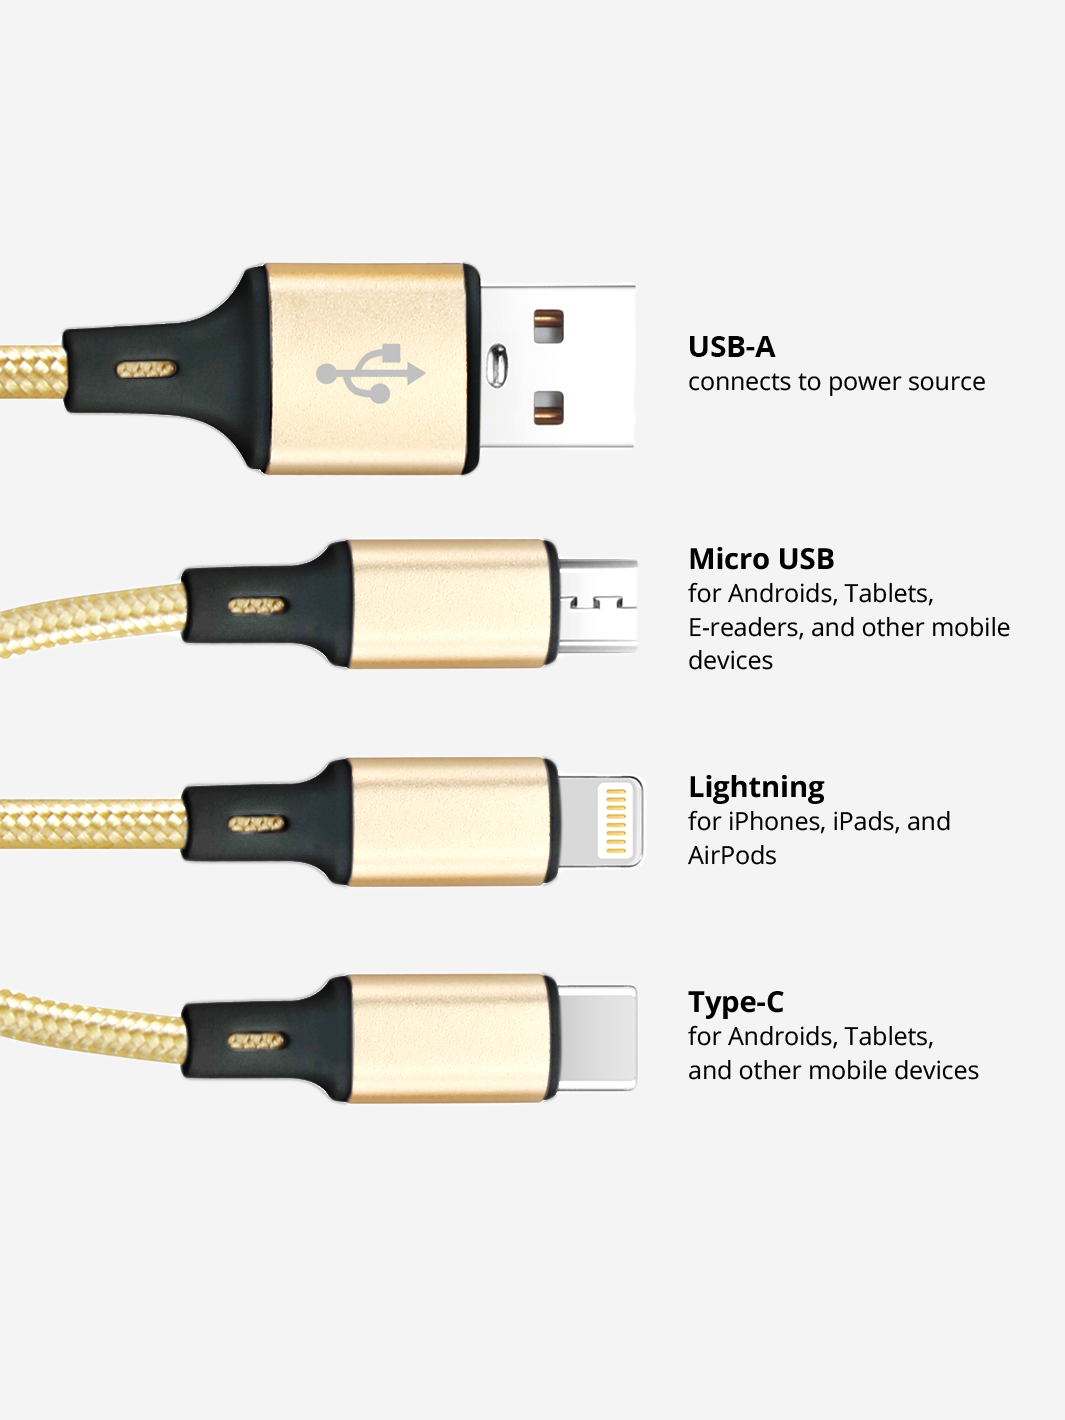 Gold 3-in-1 Charging Cable - 10 Ft (USB A) - 2 PACK